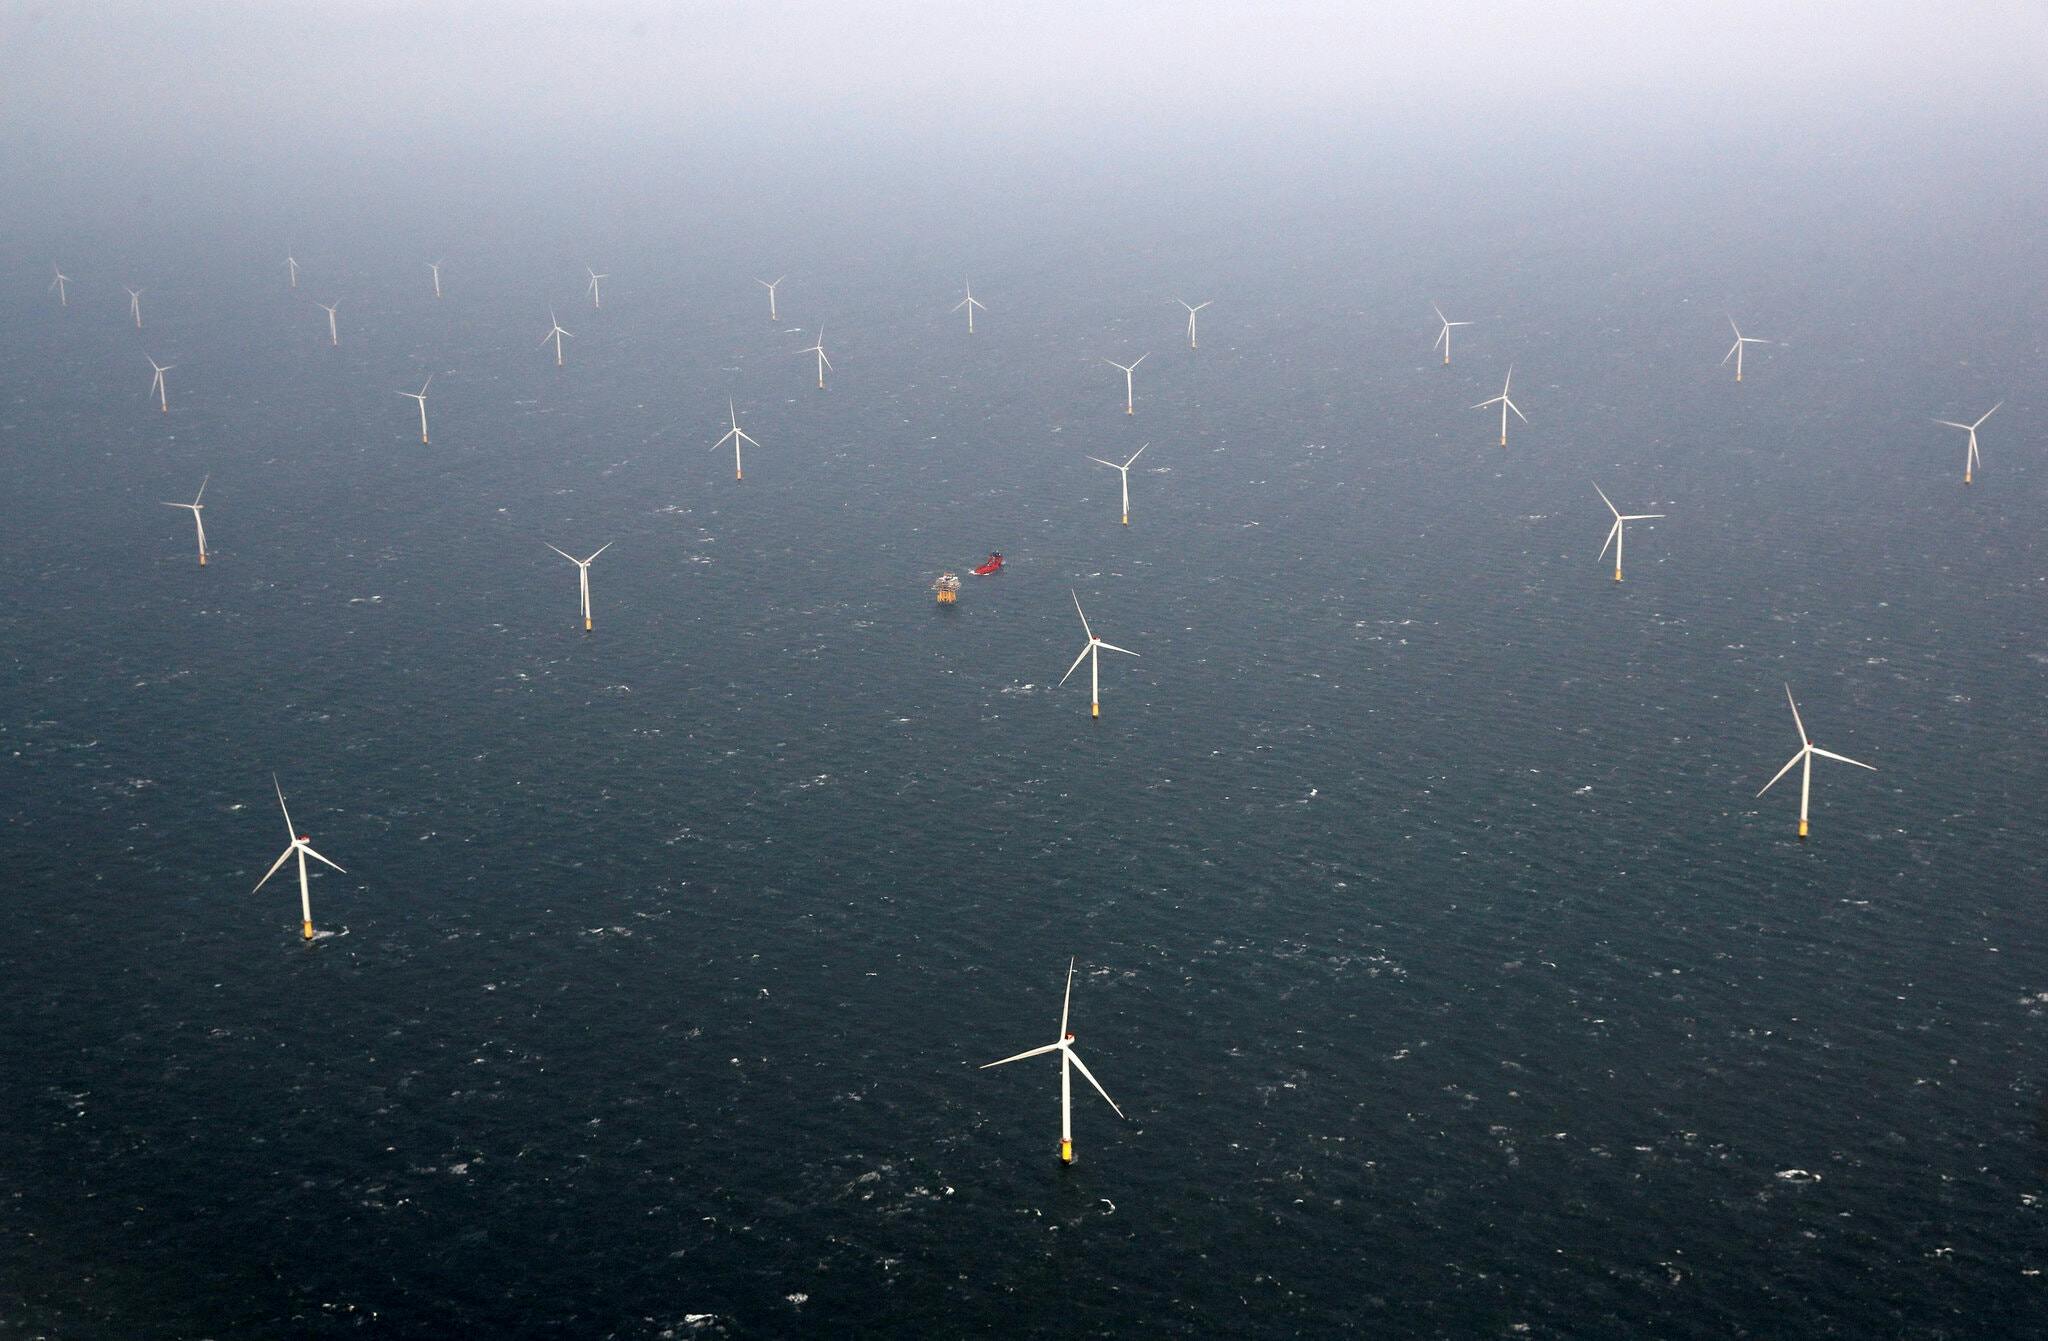 A wind farm off the English coast operated by Equinor of Norway. Equinor is among European companies increasing investments in low-emission businesses while shrinking oil and gas production.